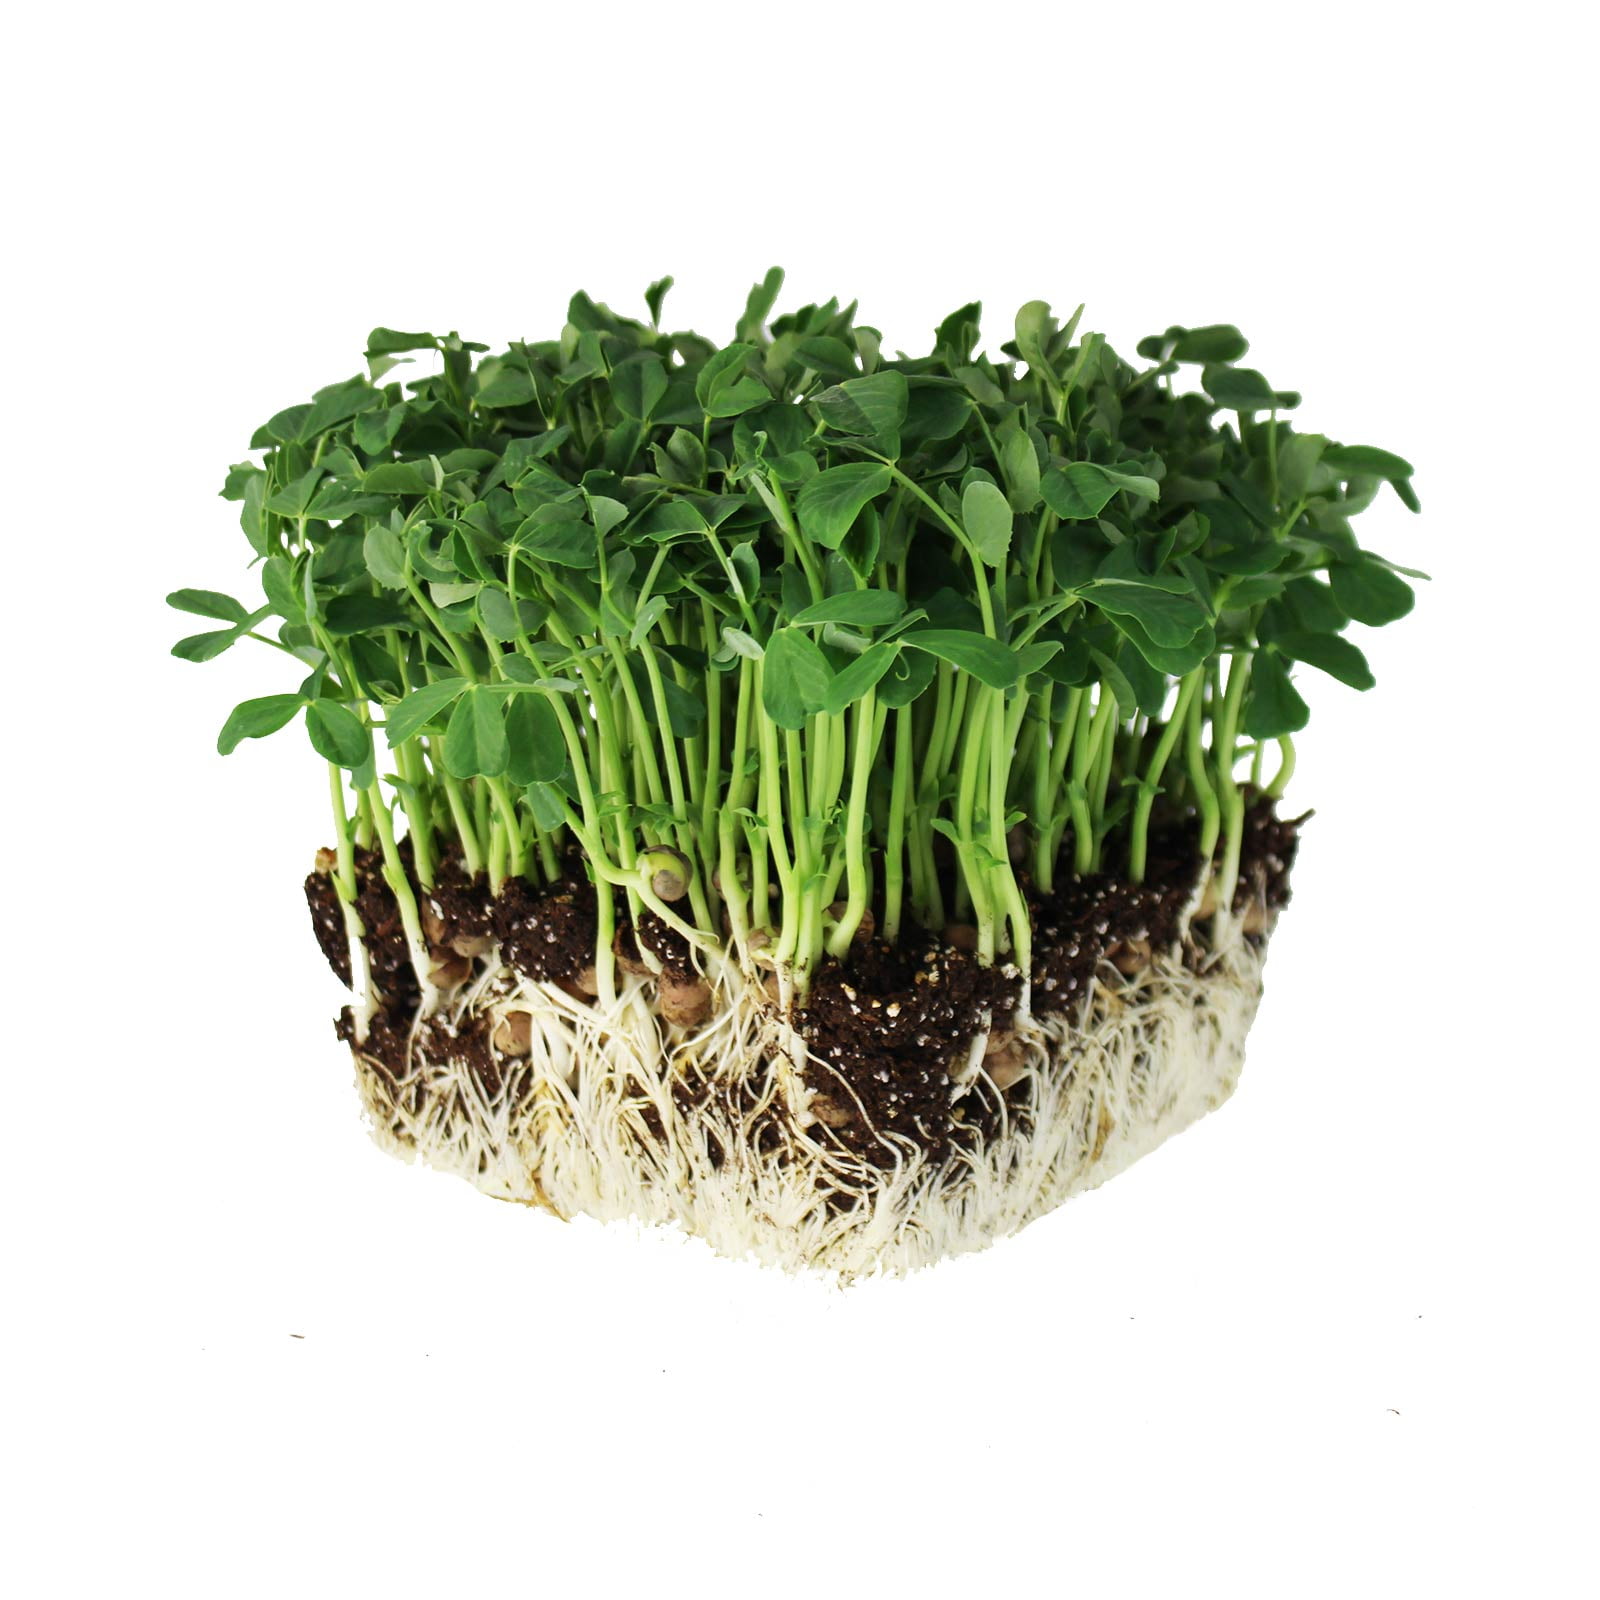 1,000,000 Microgreens  alfalfa seeds salad sprouts micro green Organic Non GMO  Ships from harvested in USA  Organic Micro greens Non GMO